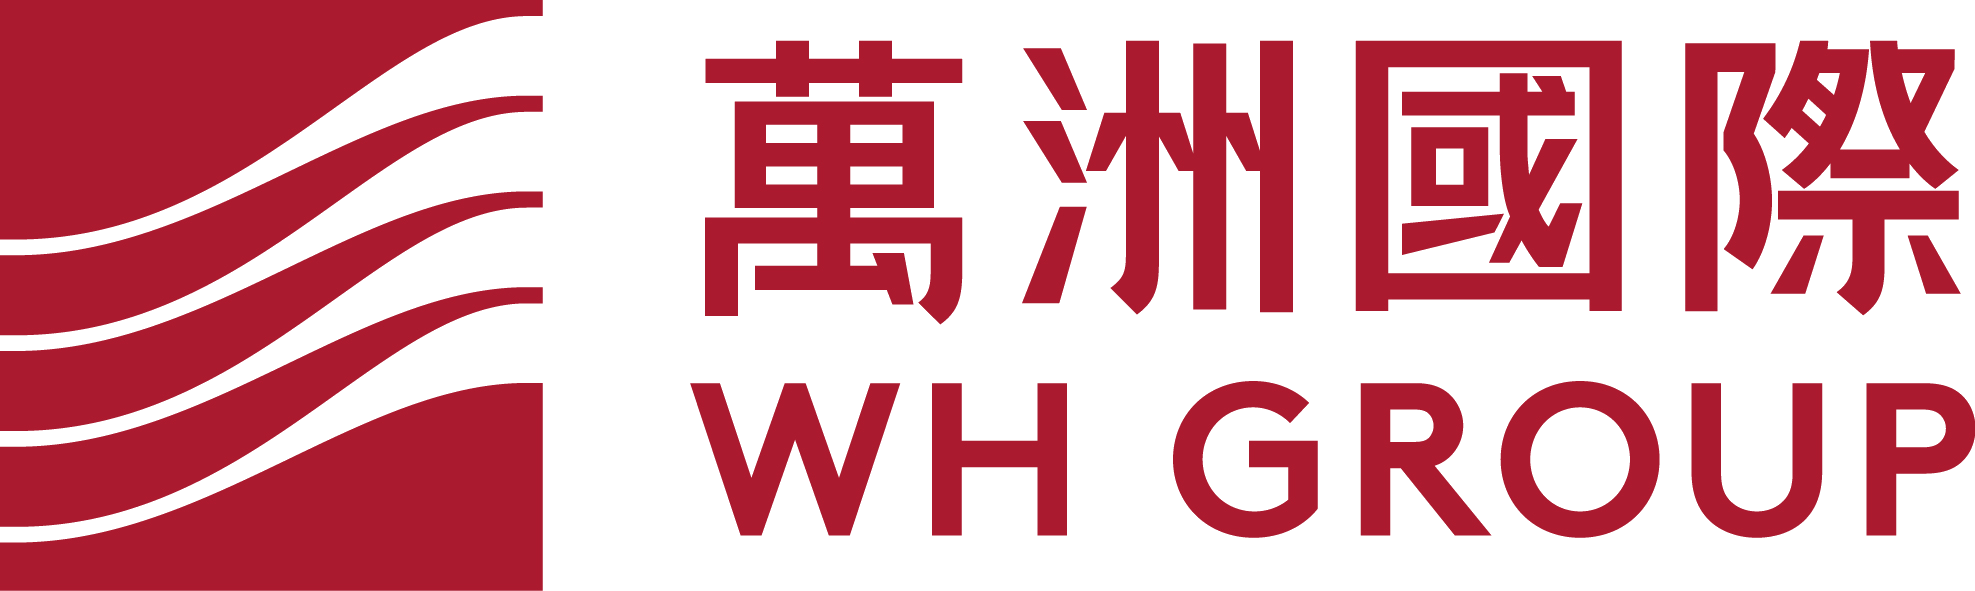 WH Group Brand Logo